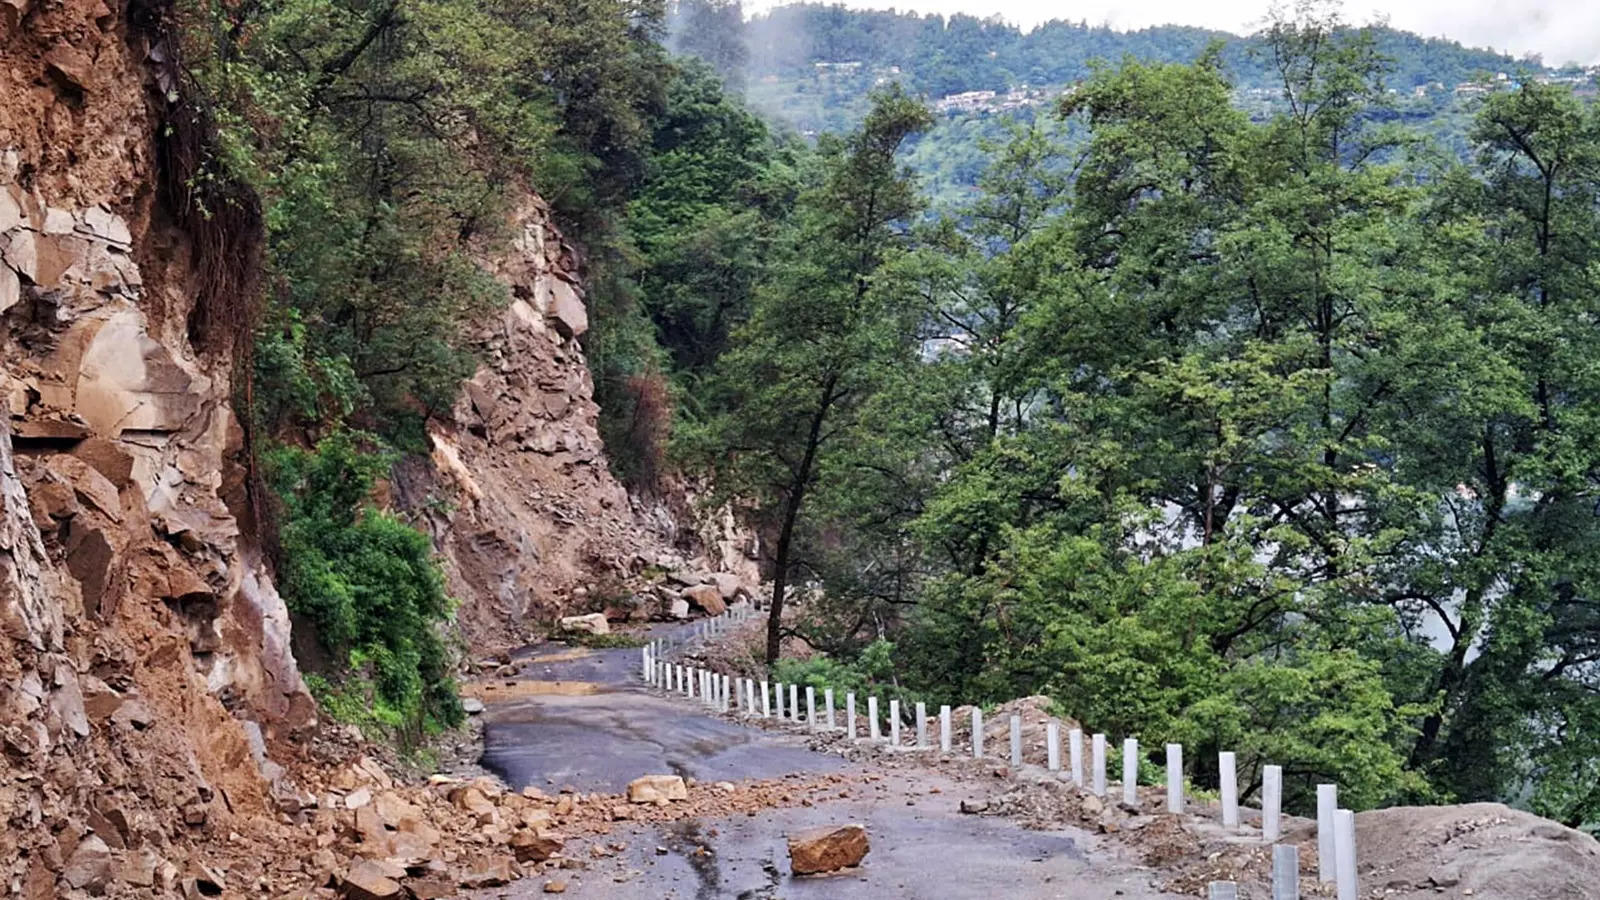 Rain triggers landslides in Uttarakhand, two drown in separate incidents 